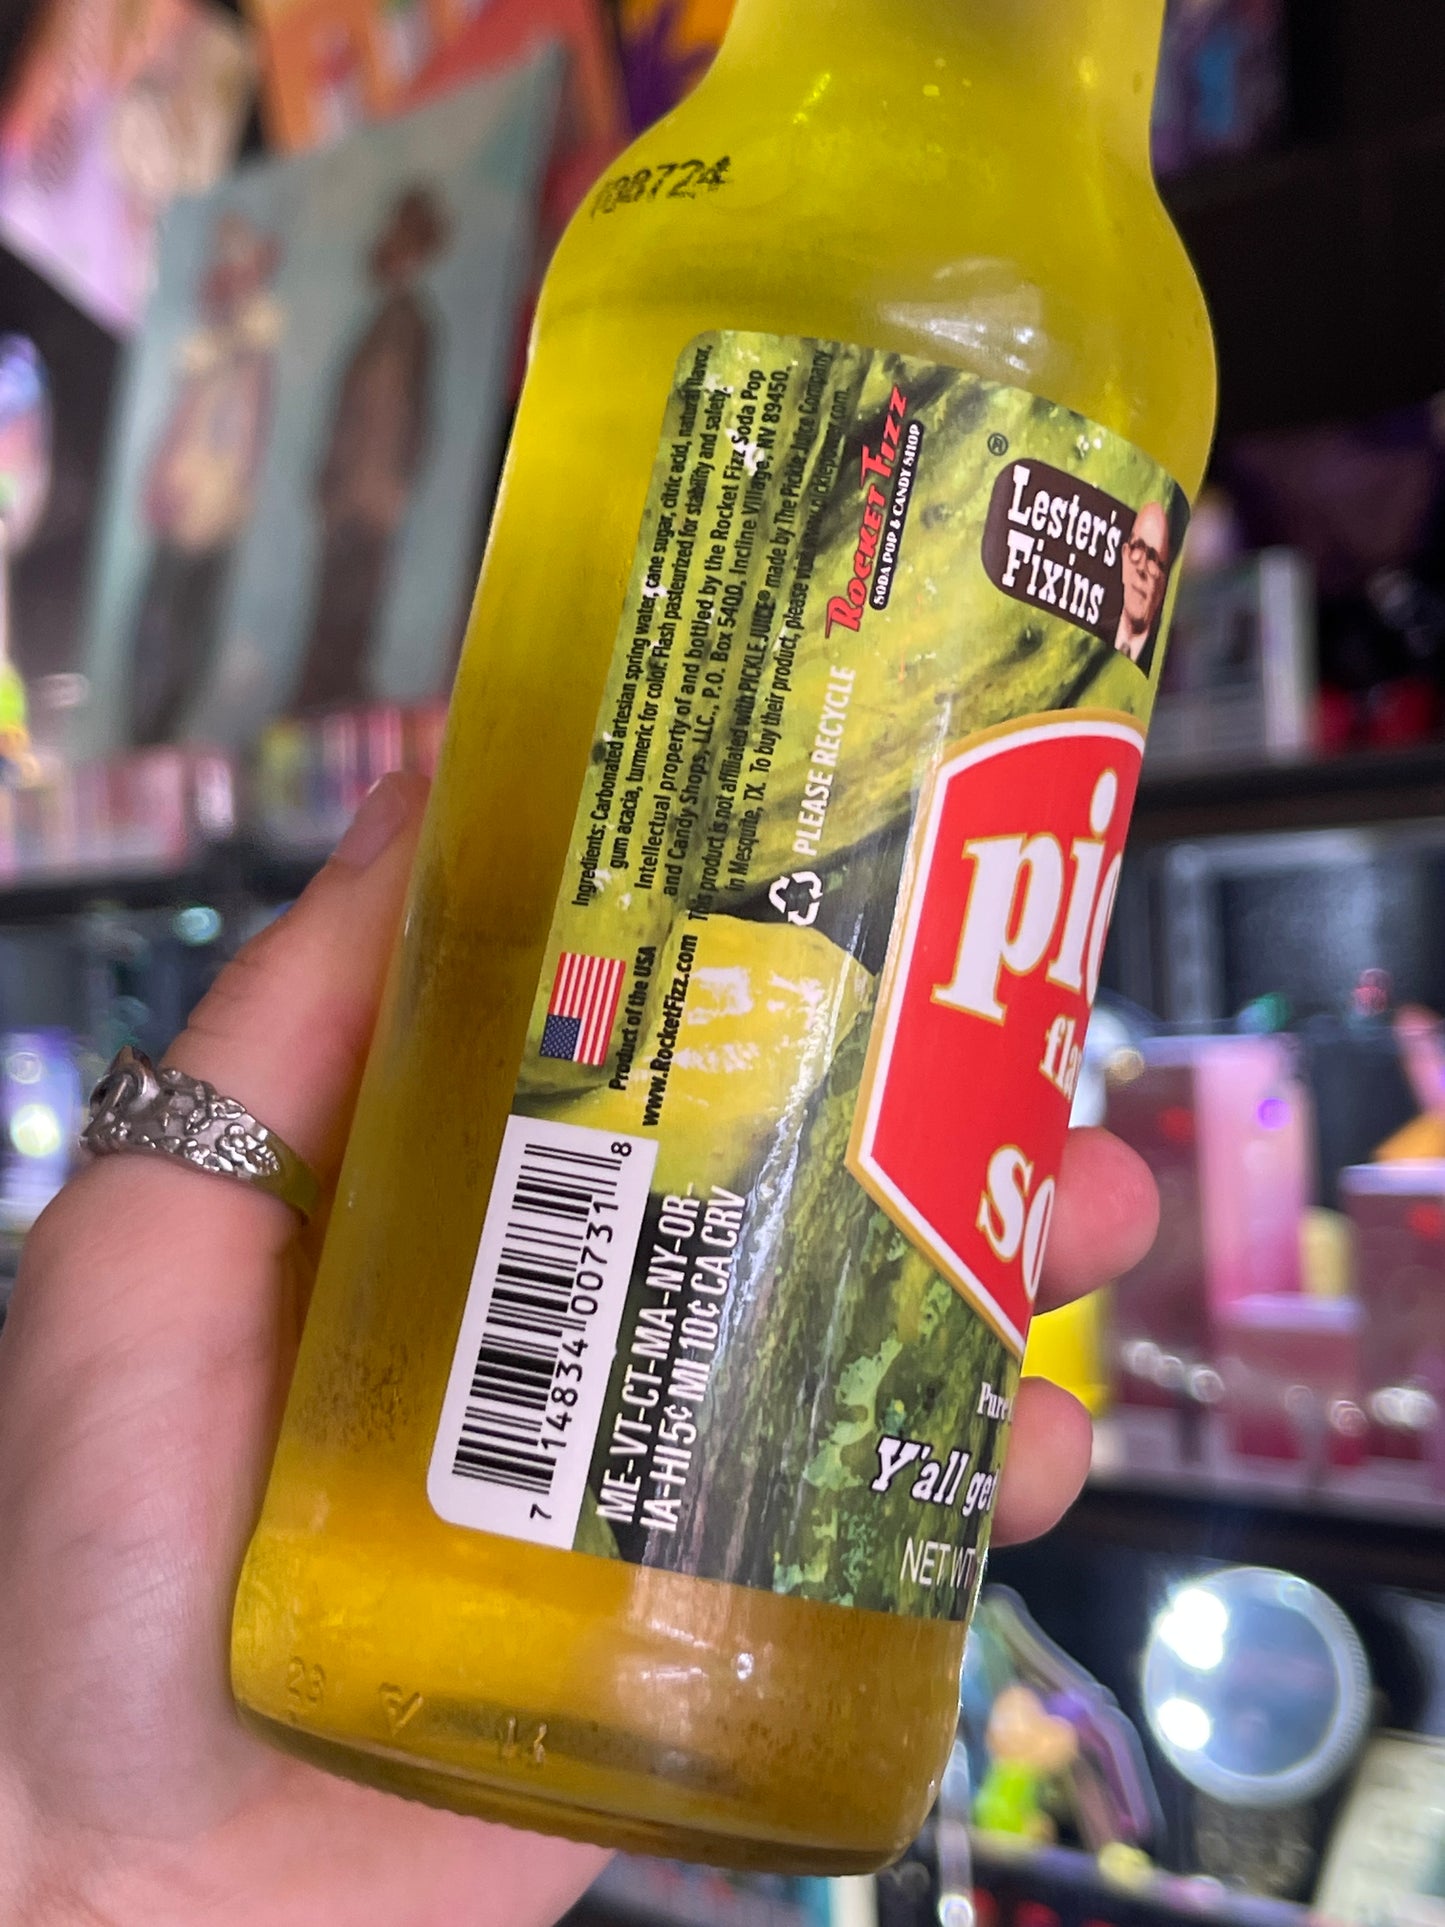 Lester’s Fixins Pickle Flavored Soda